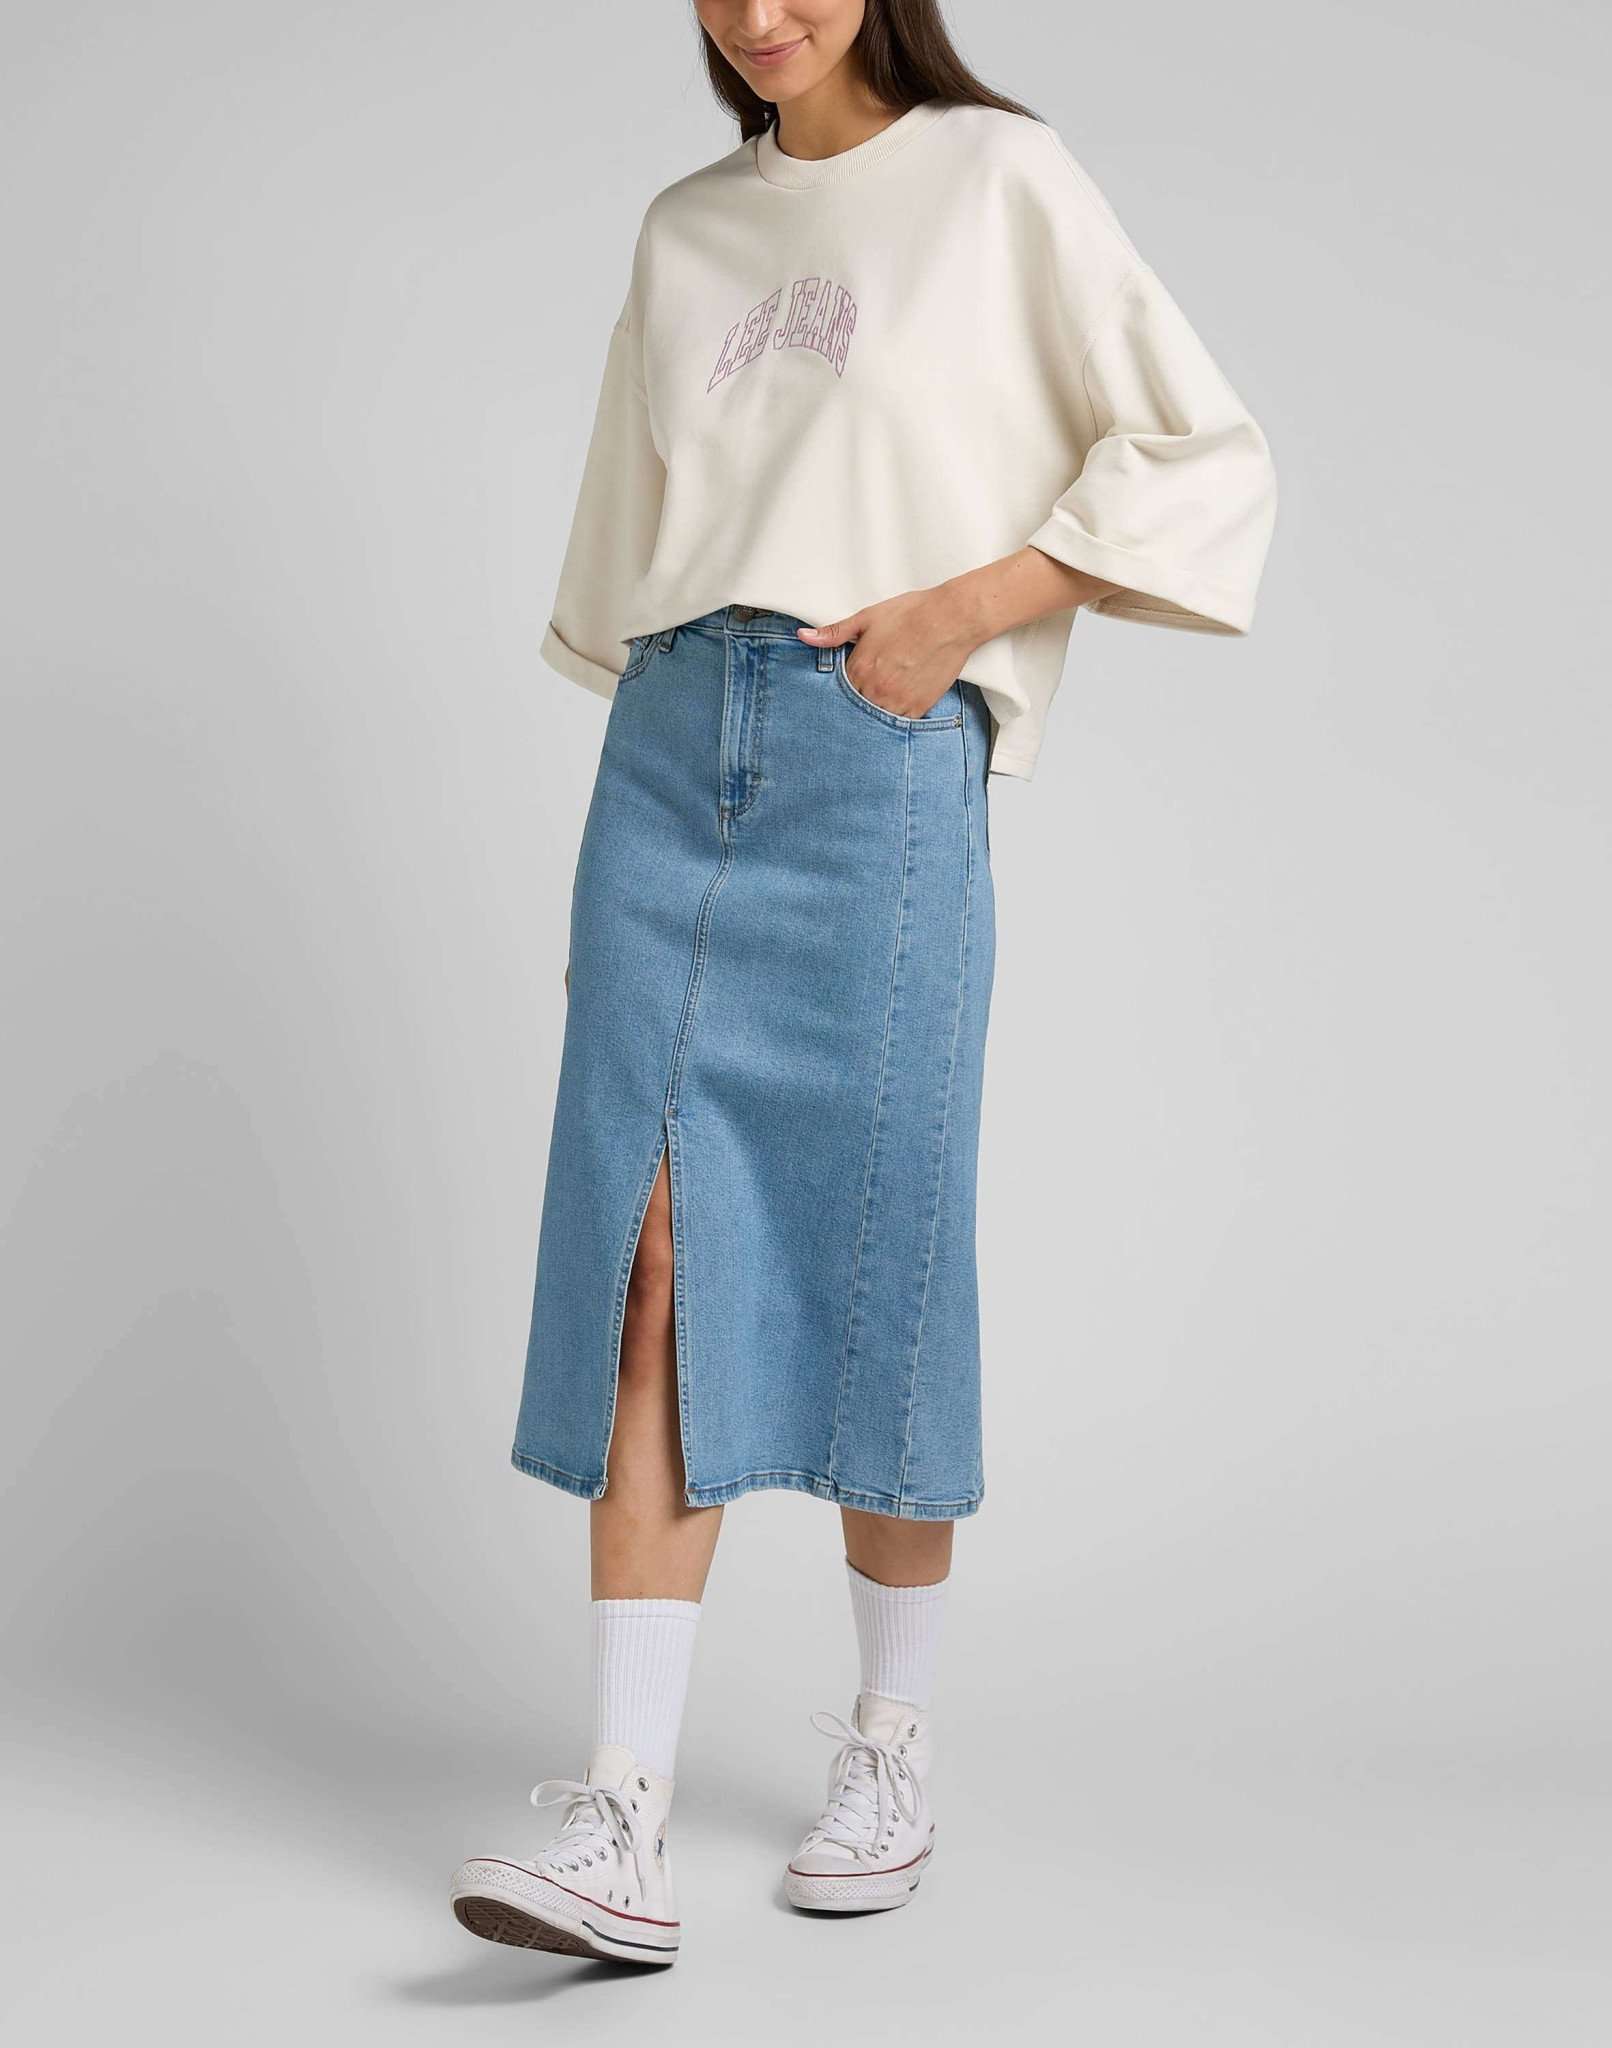 Midi Skirt in Partly Cloudy Röcke Lee   